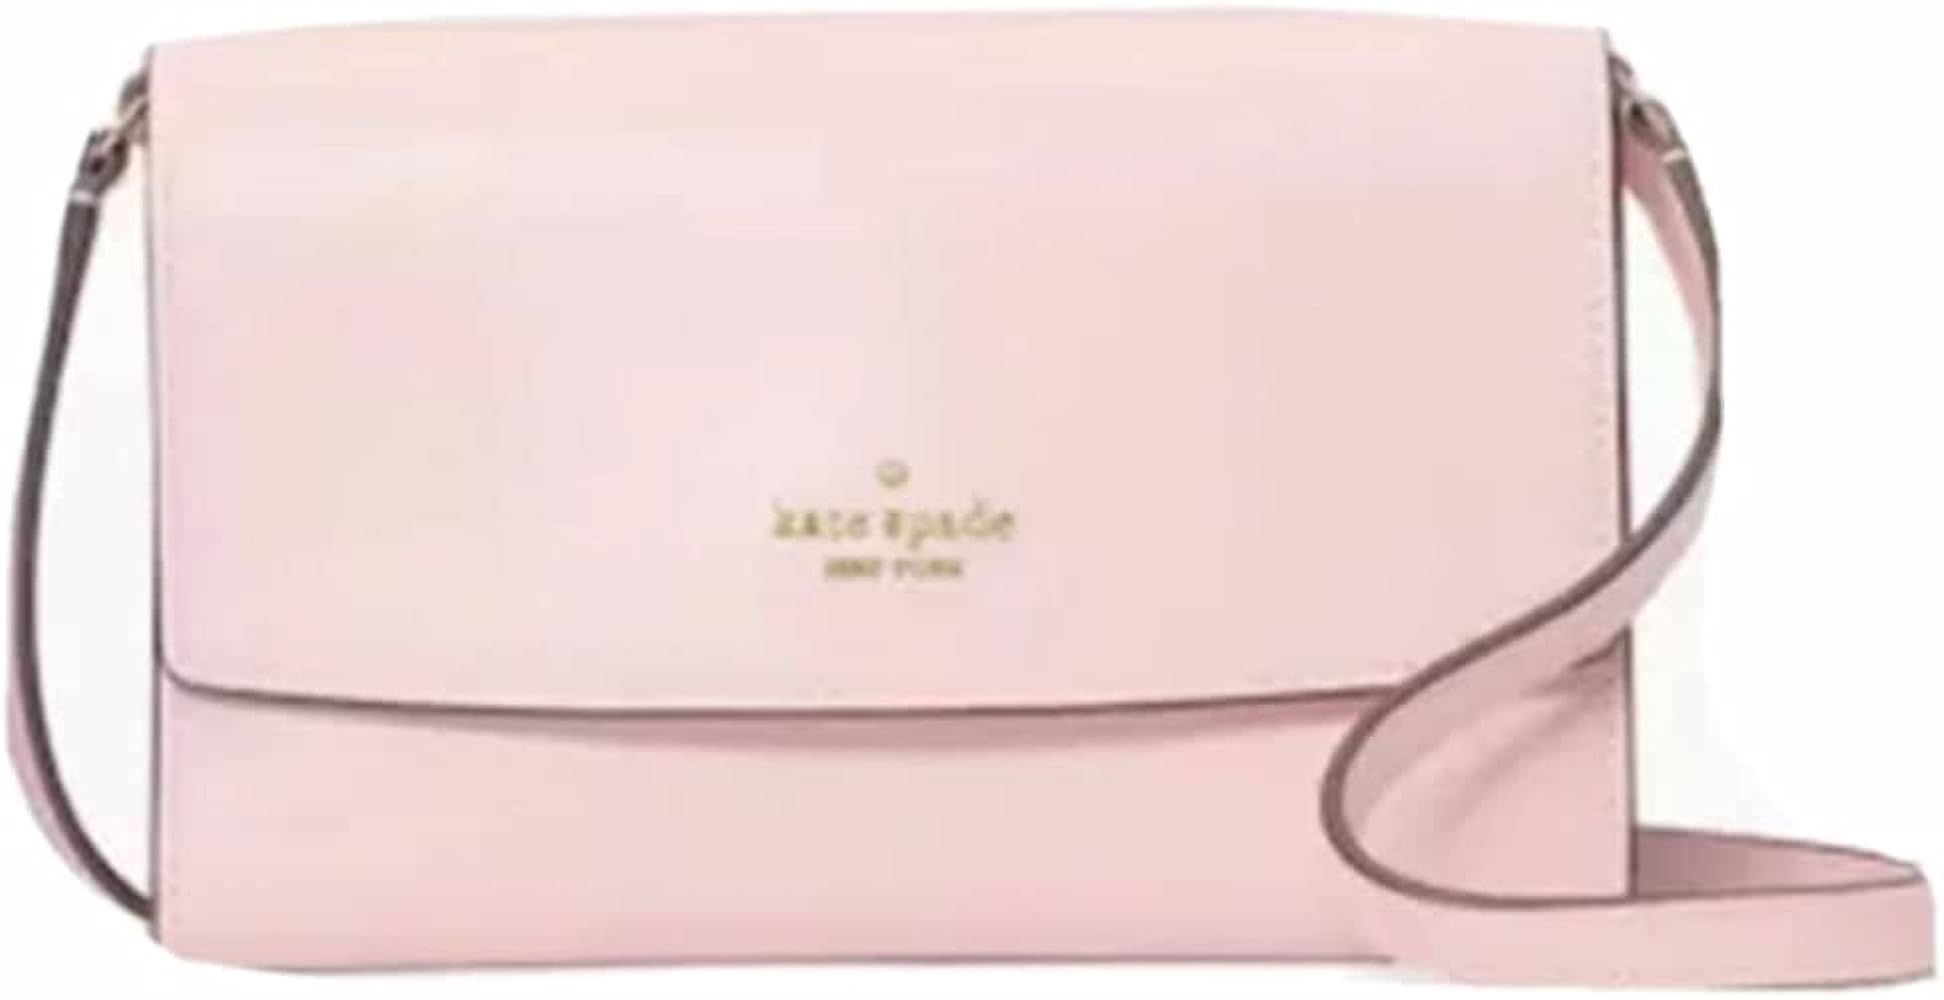 Visit the Kate Spade New York Store 4.7  35
Kate Spade Perry Leather Crossbody
 




   
 
100+ boug | Amazon (US)